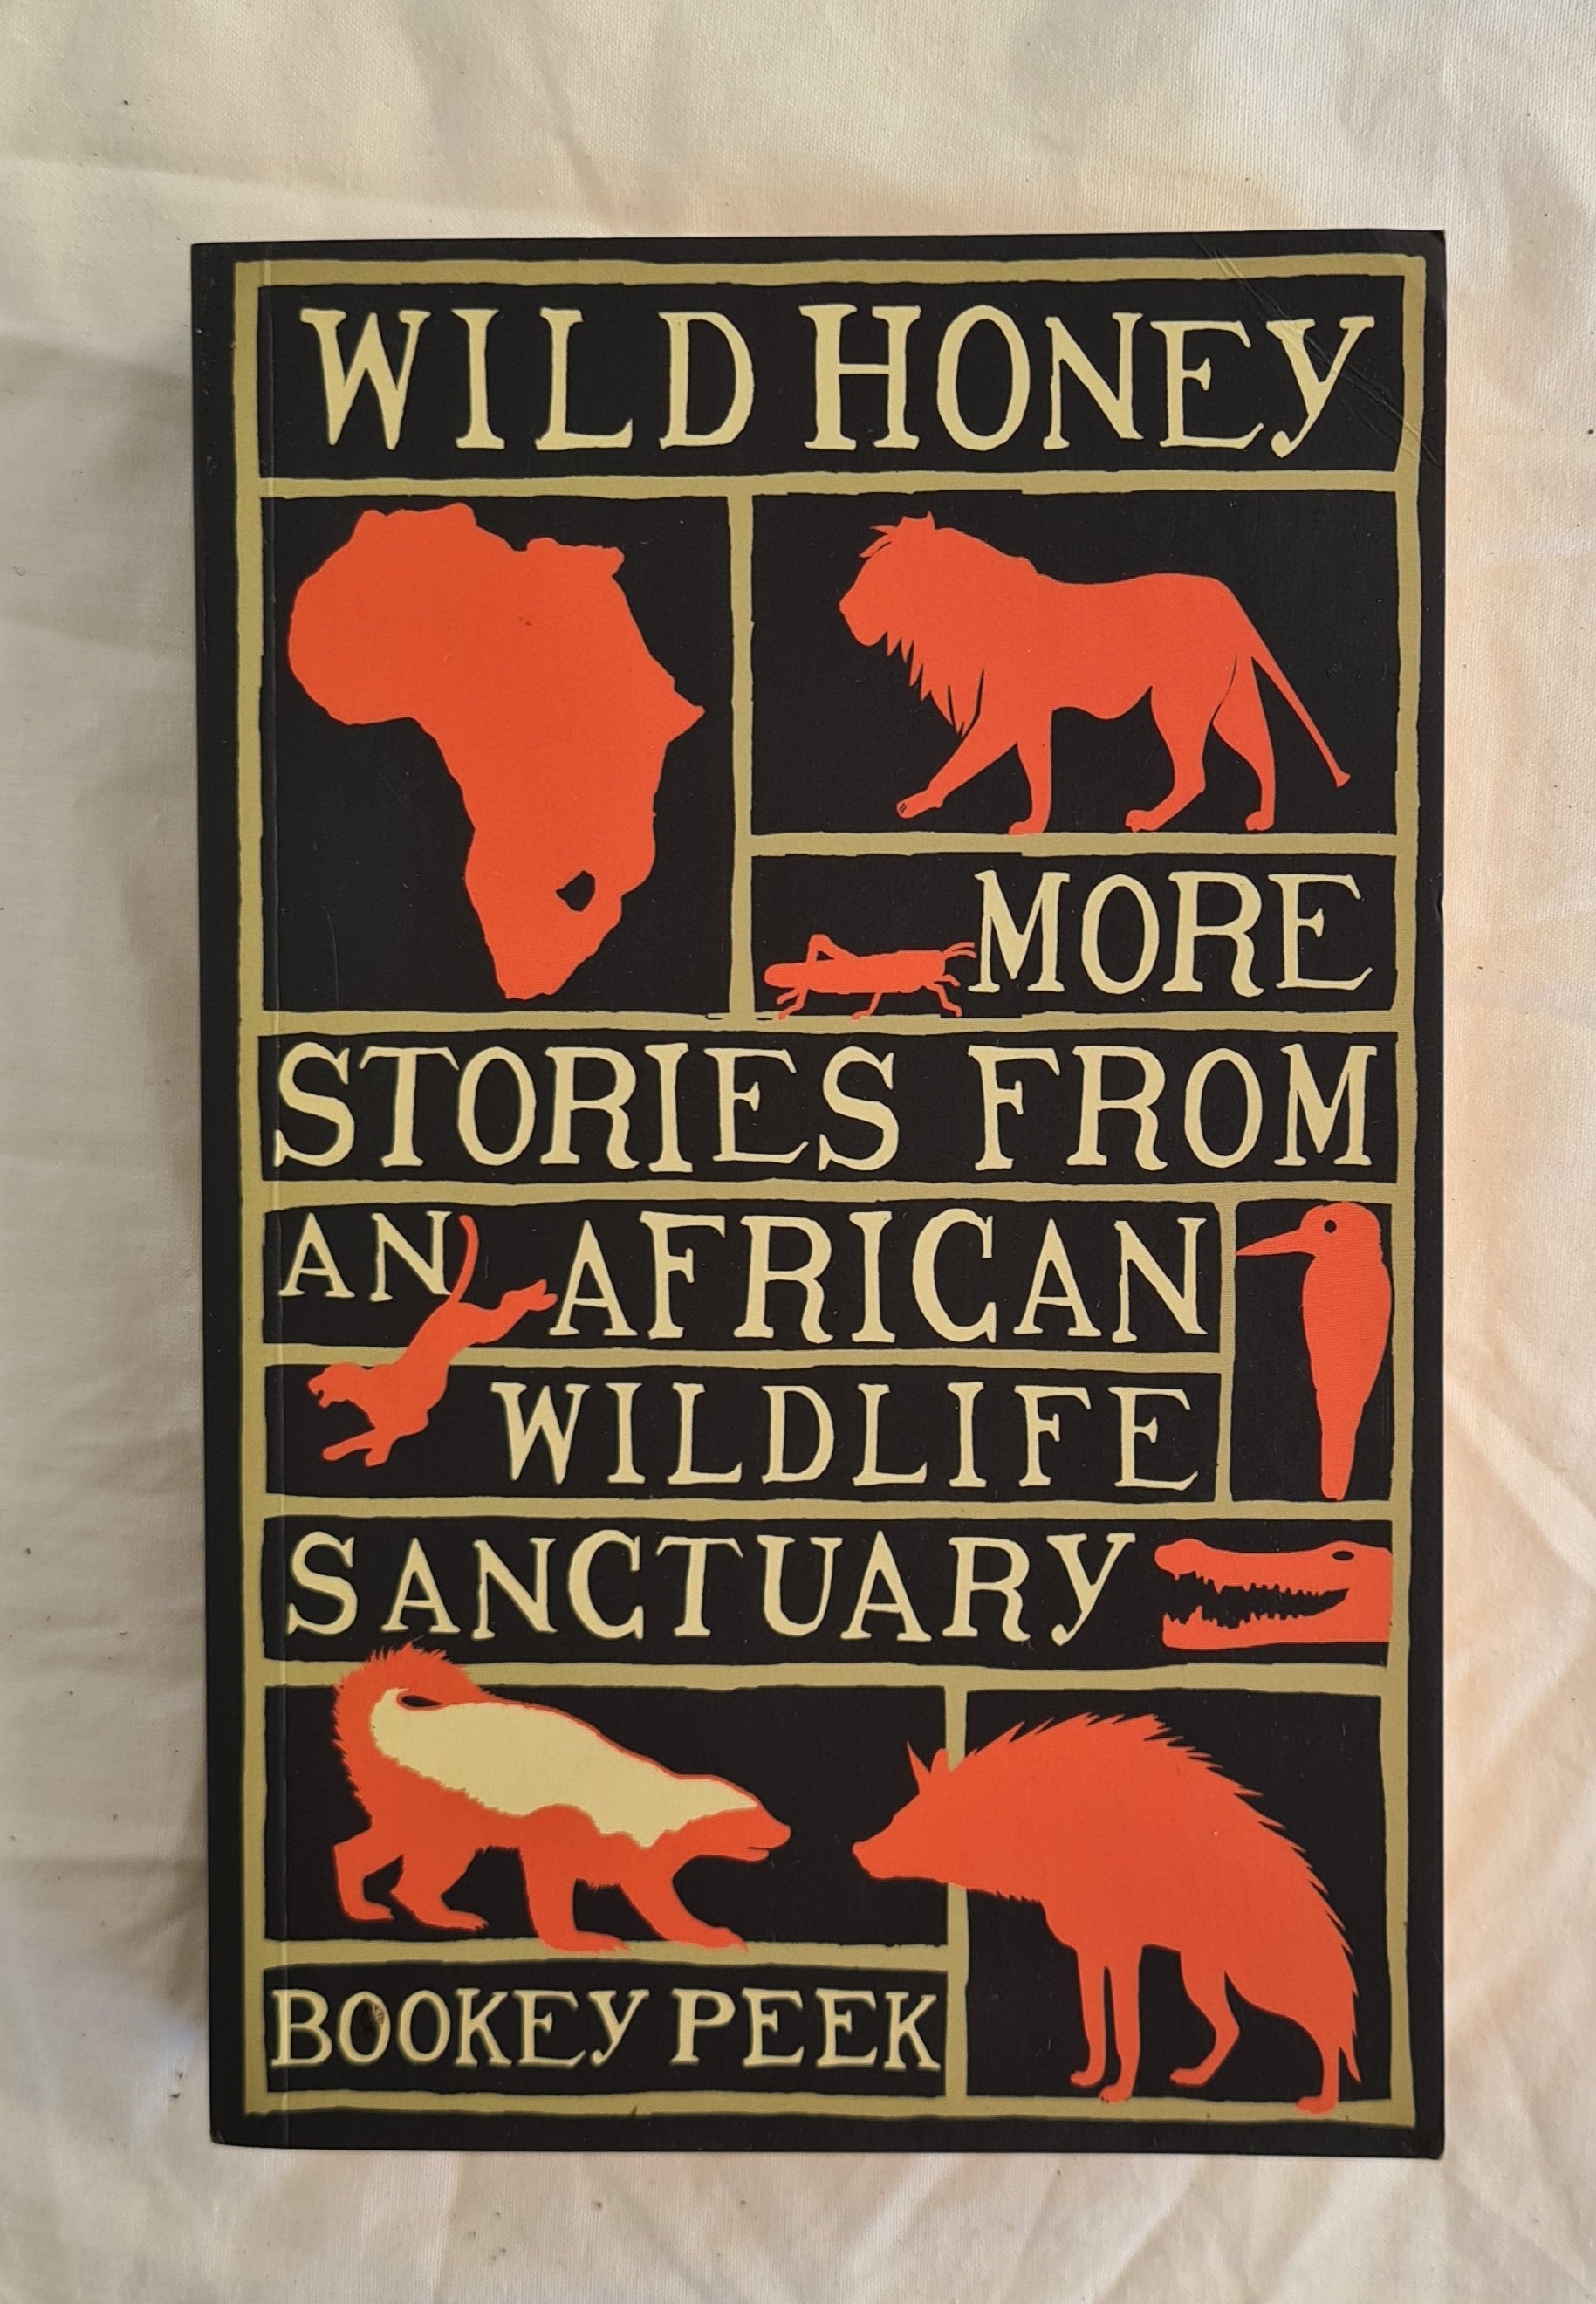 Wild Honey  More Stories from an African Wildlife Sanctuary  by Bookey Peek  with photographs and illustrations by Richard Peek